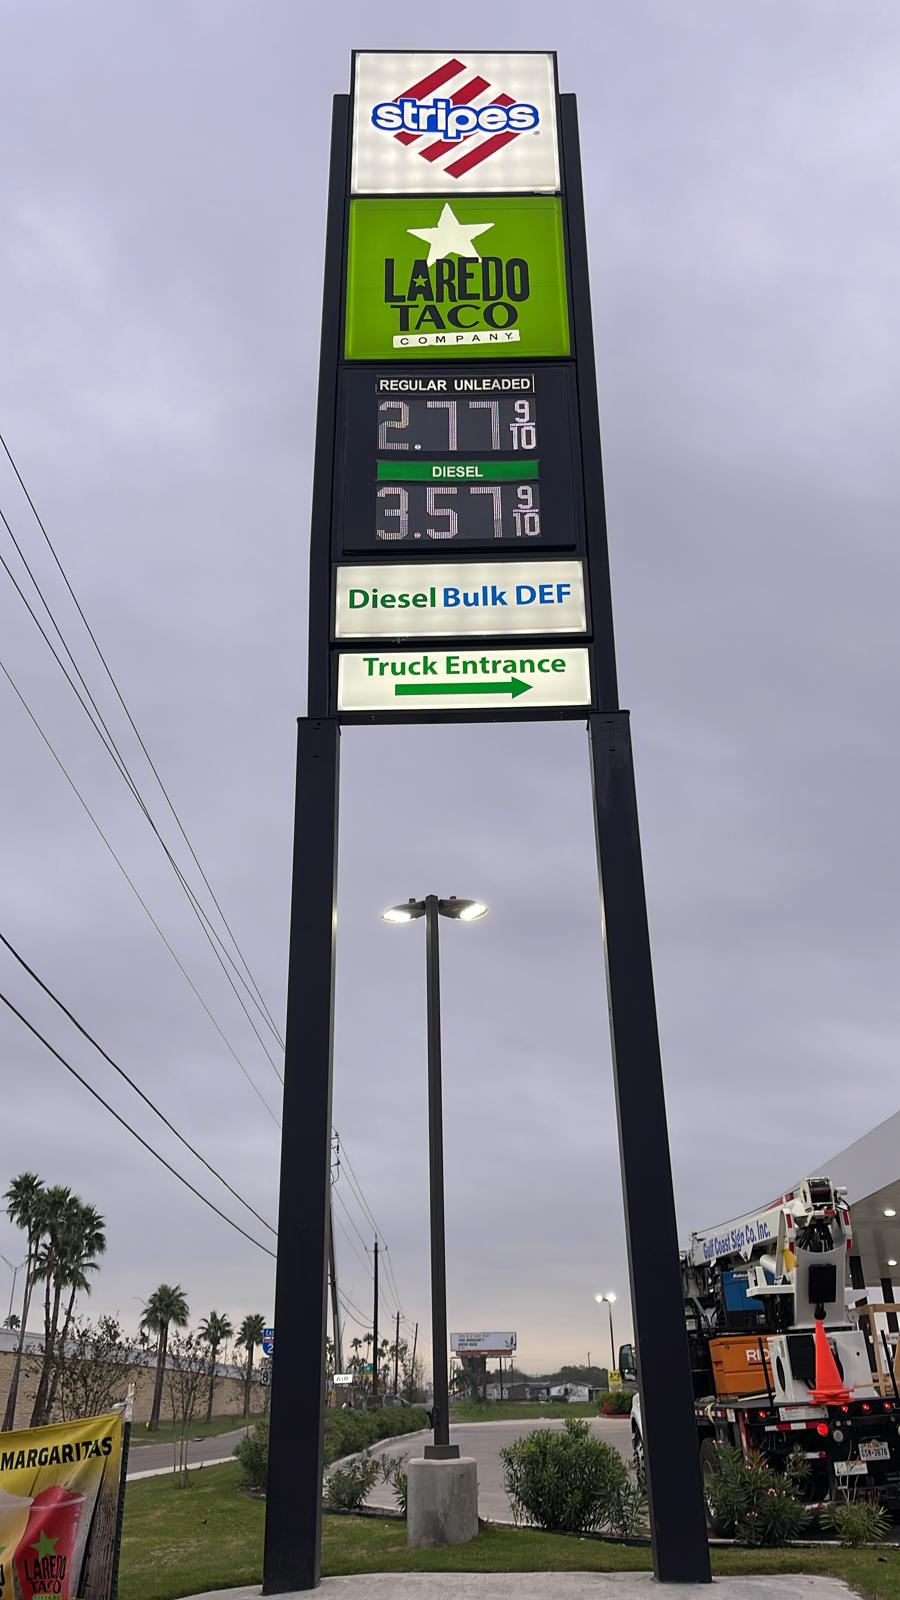 Synchronized branding for Stripes and Laredo Taco Company with a custom-designed pylon sign featuring fuel prices and amenities.